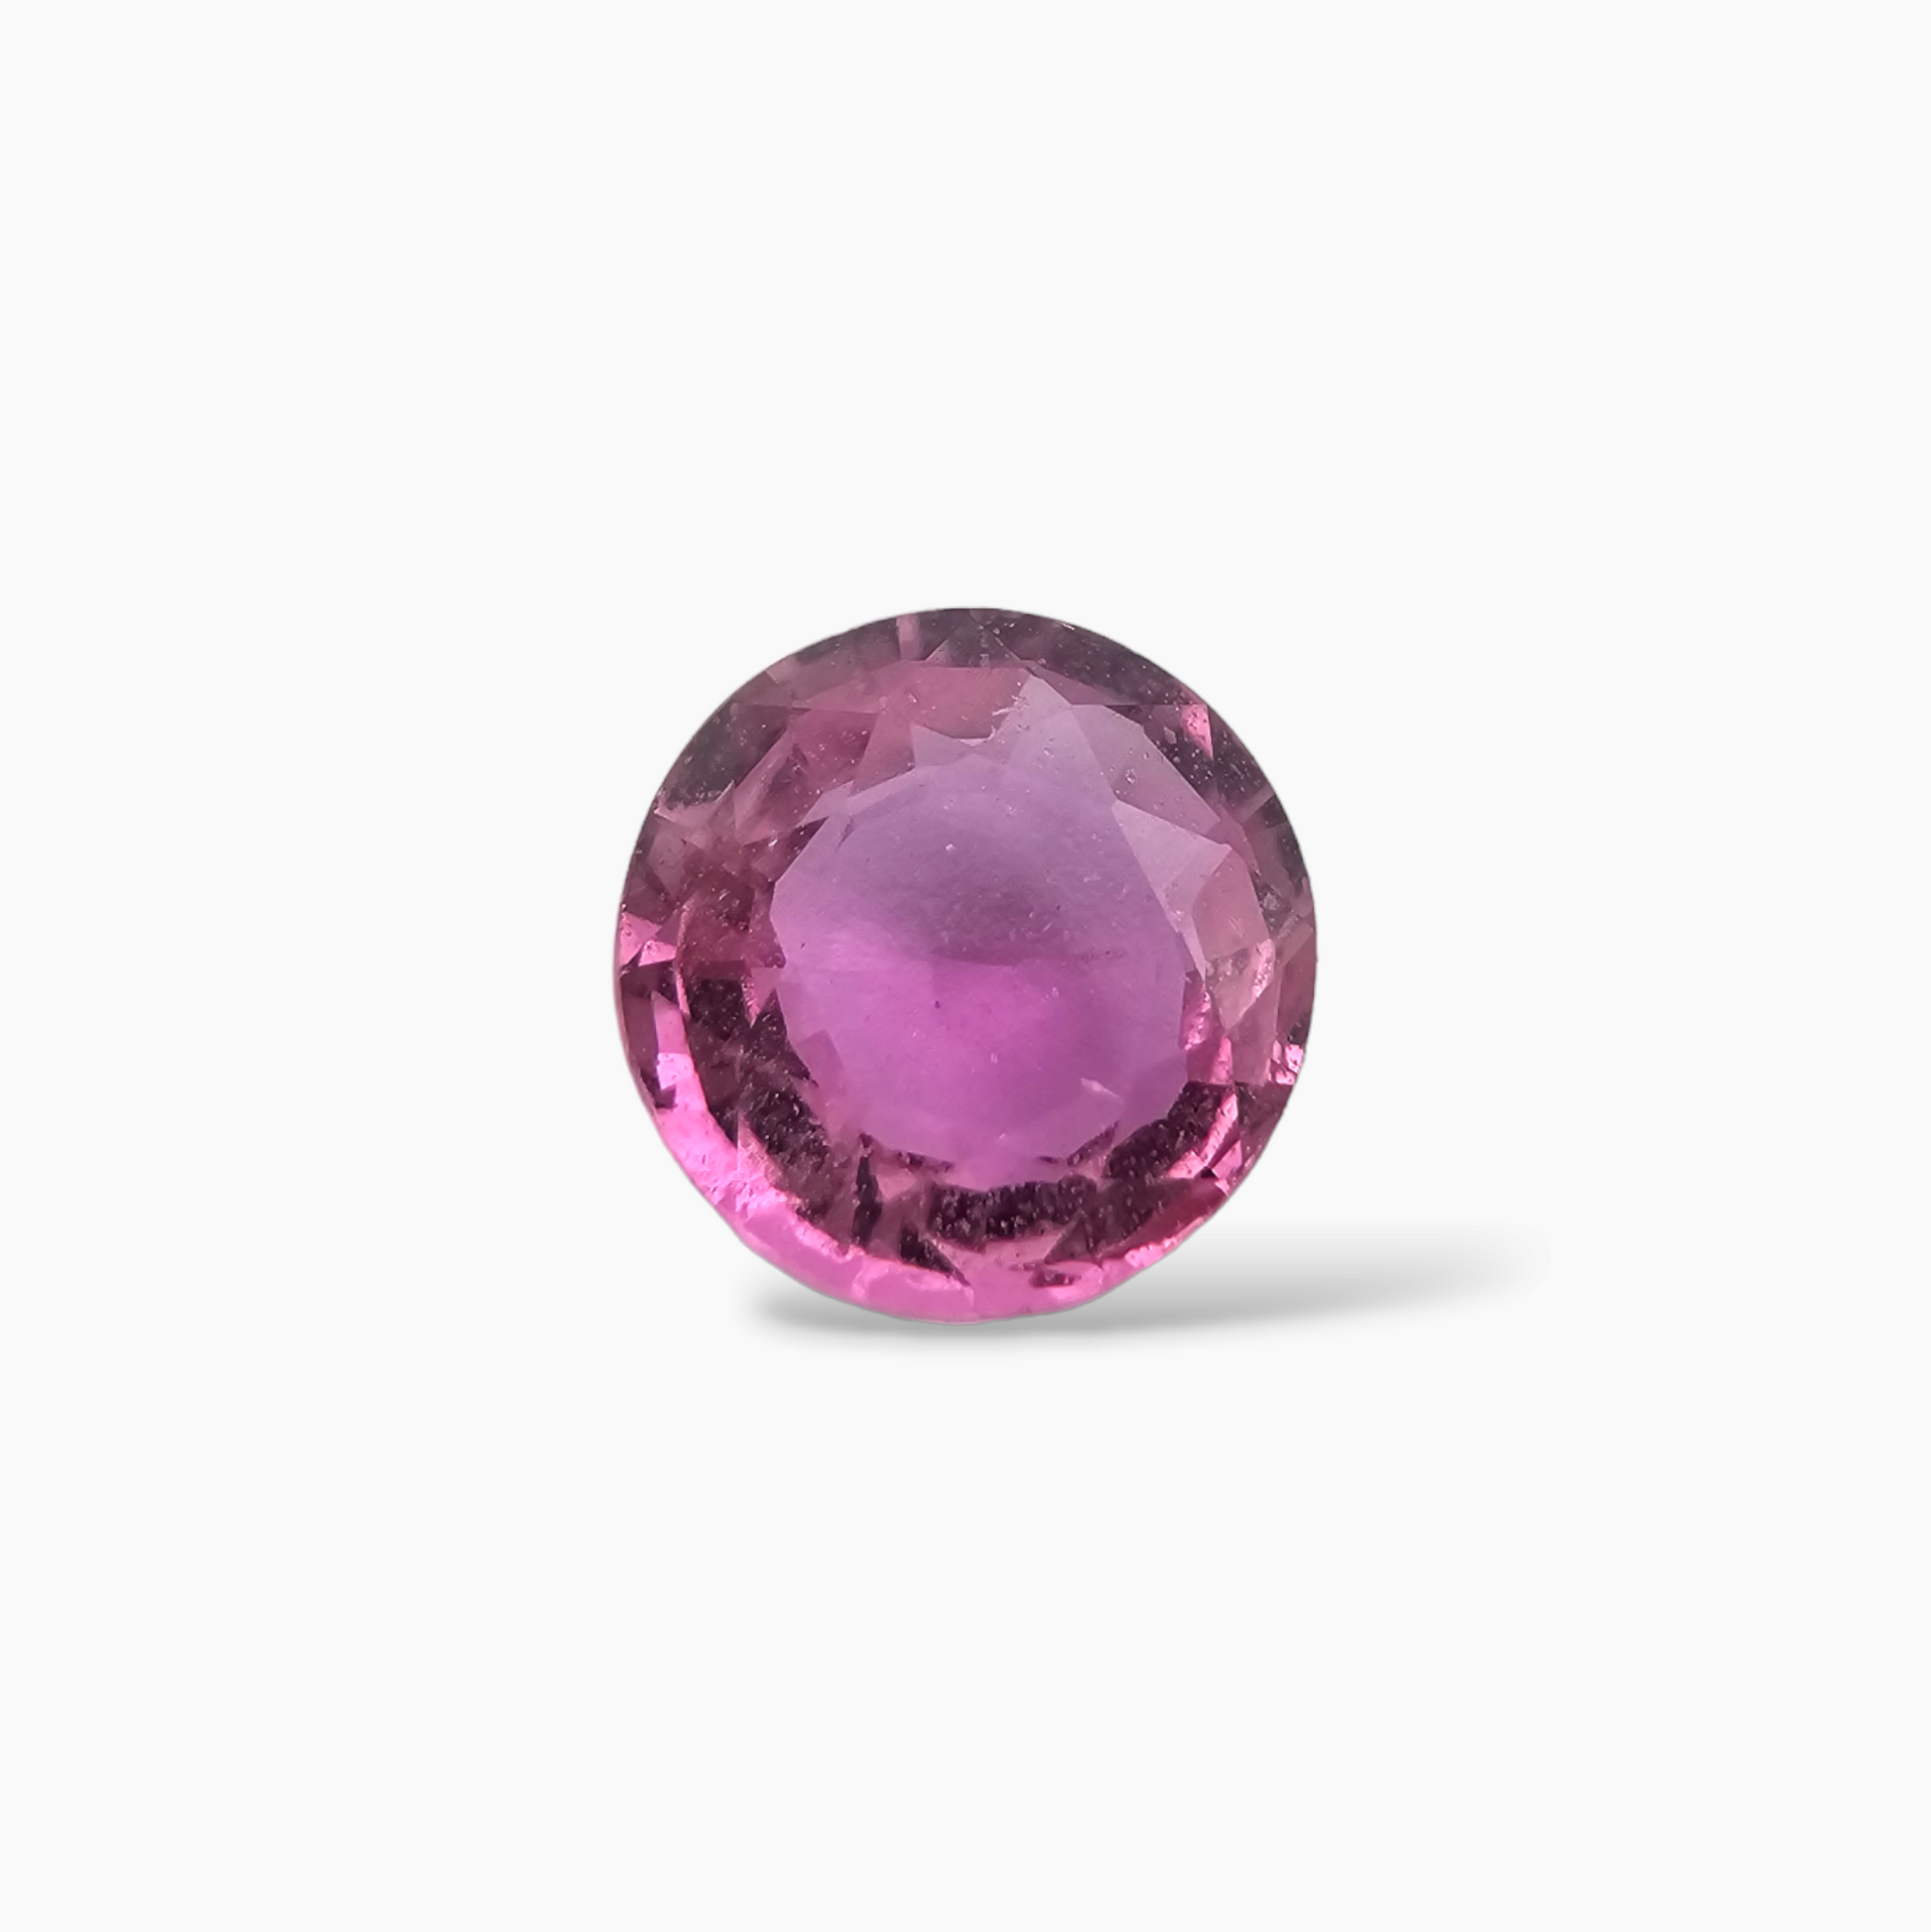 Pink Sapphire Natural Stone Round Cut 1.4 Carats